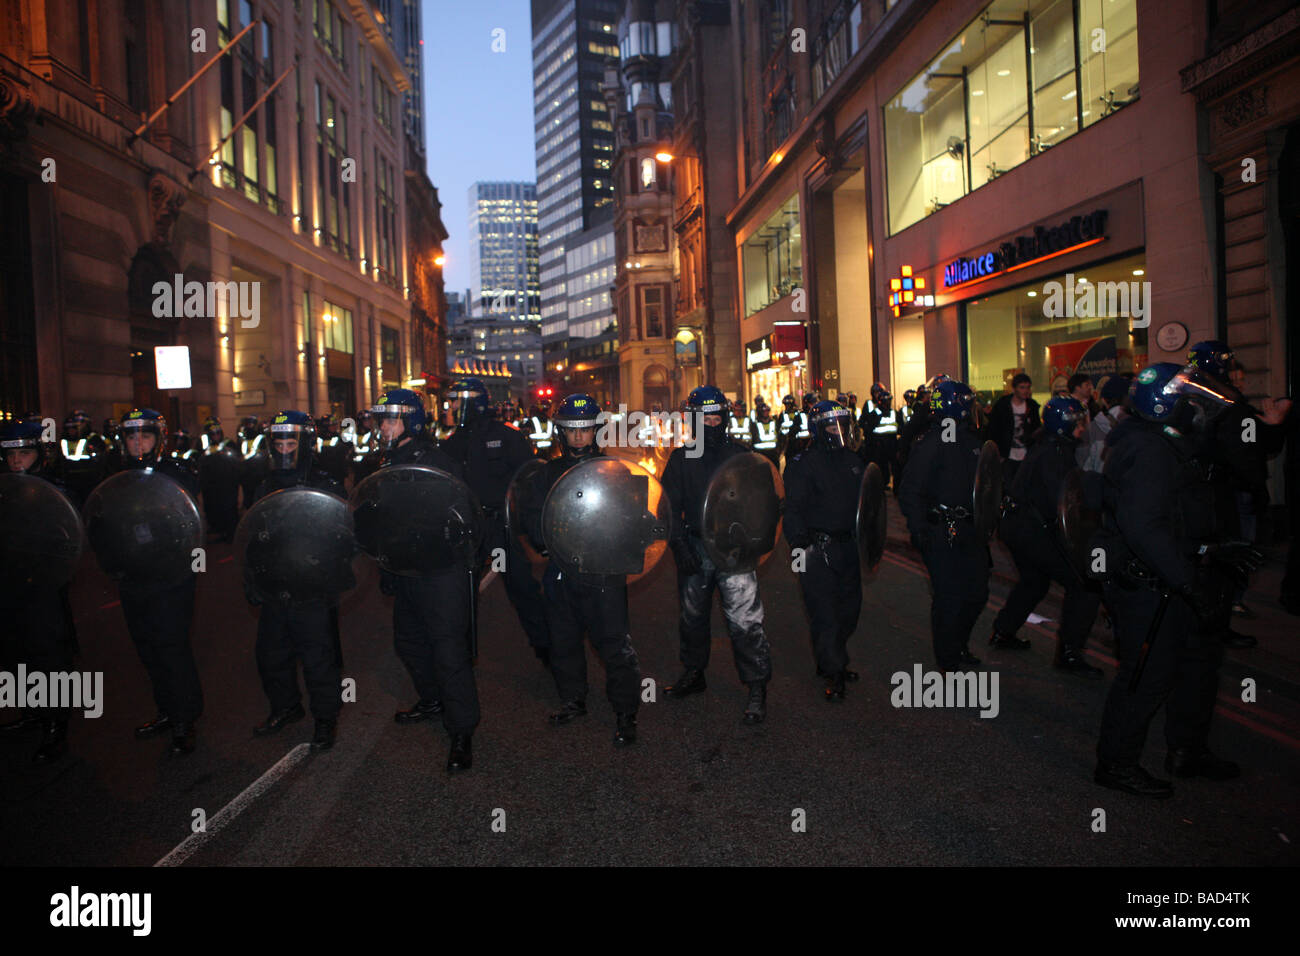 Police riot line at g20 riots, with fire in background Stock Photo